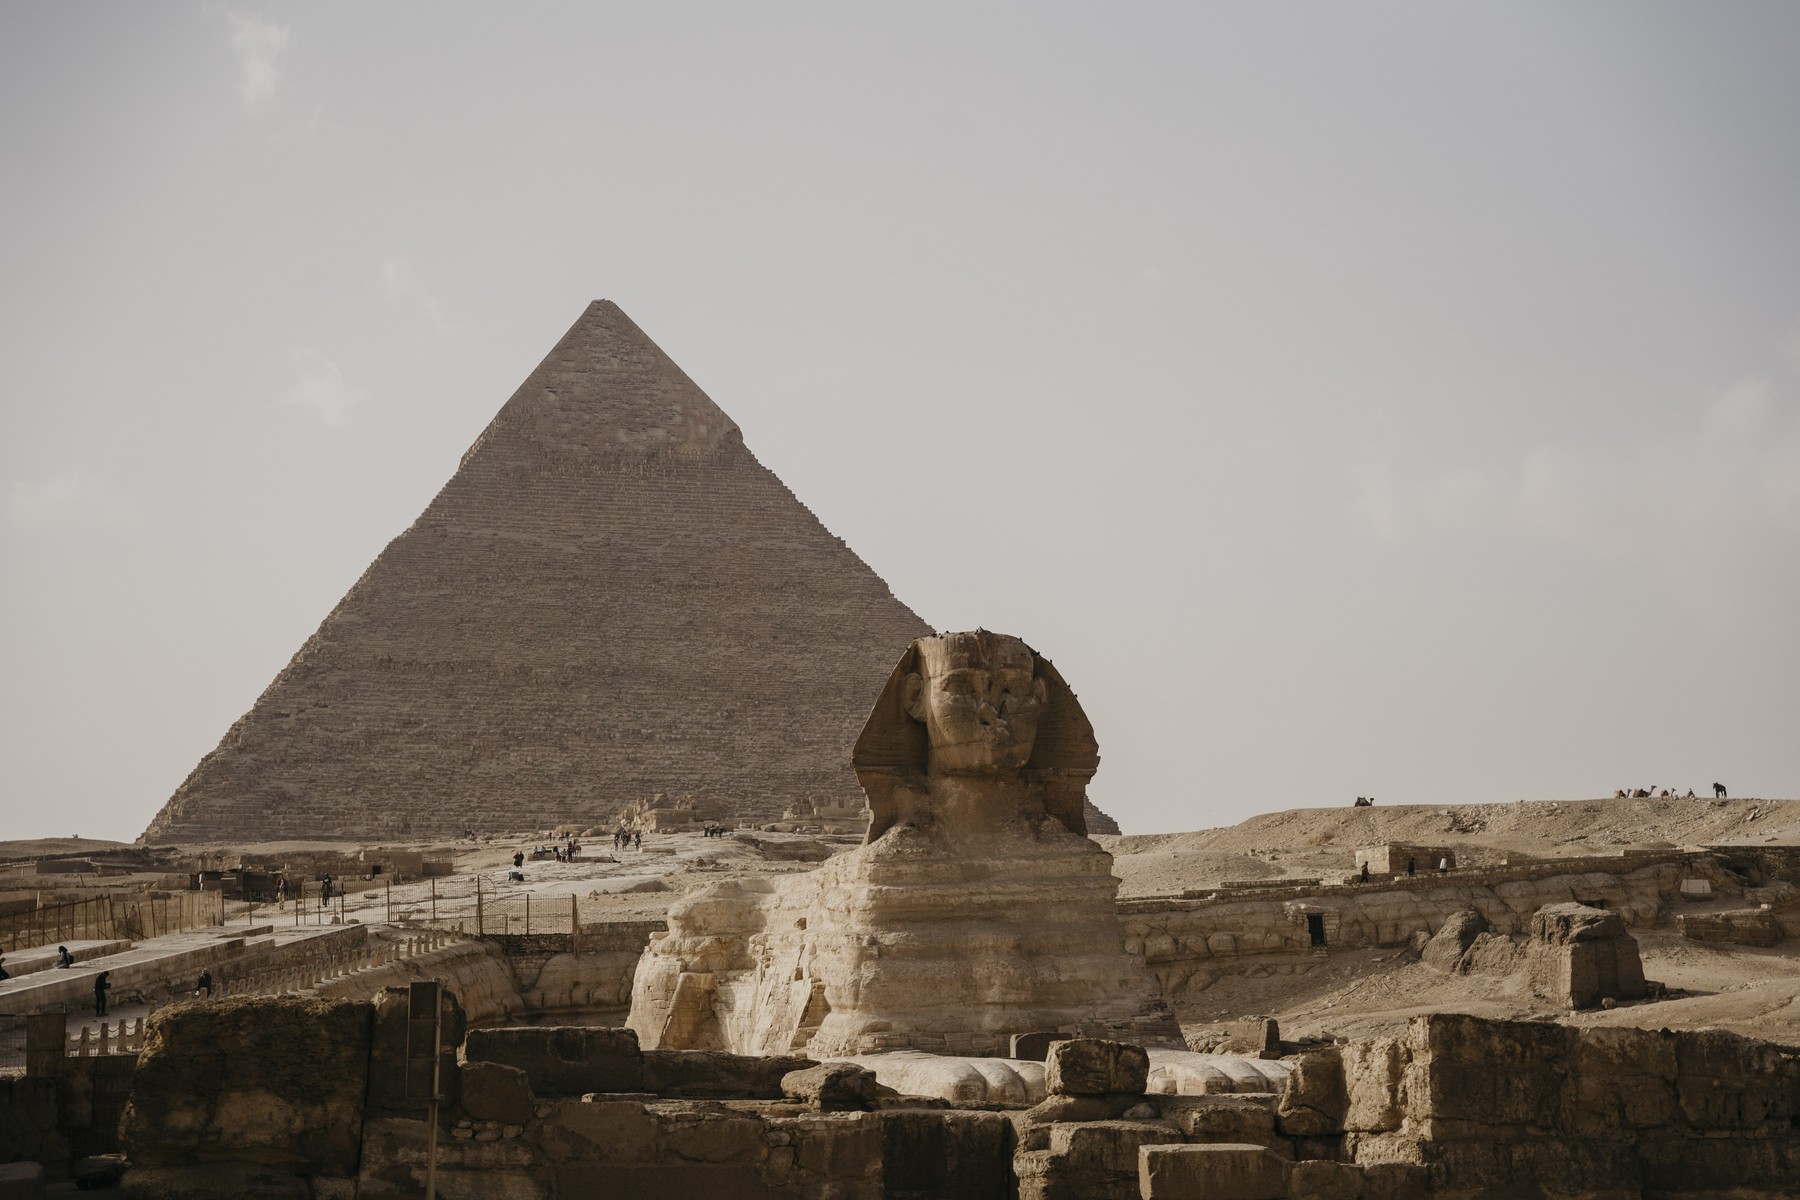 A puzzling and unexpected mystery surrounding the construction of the pyramids. Several tons of animal carcasses were used, and according to the evidence, we knew everything wrong until now.